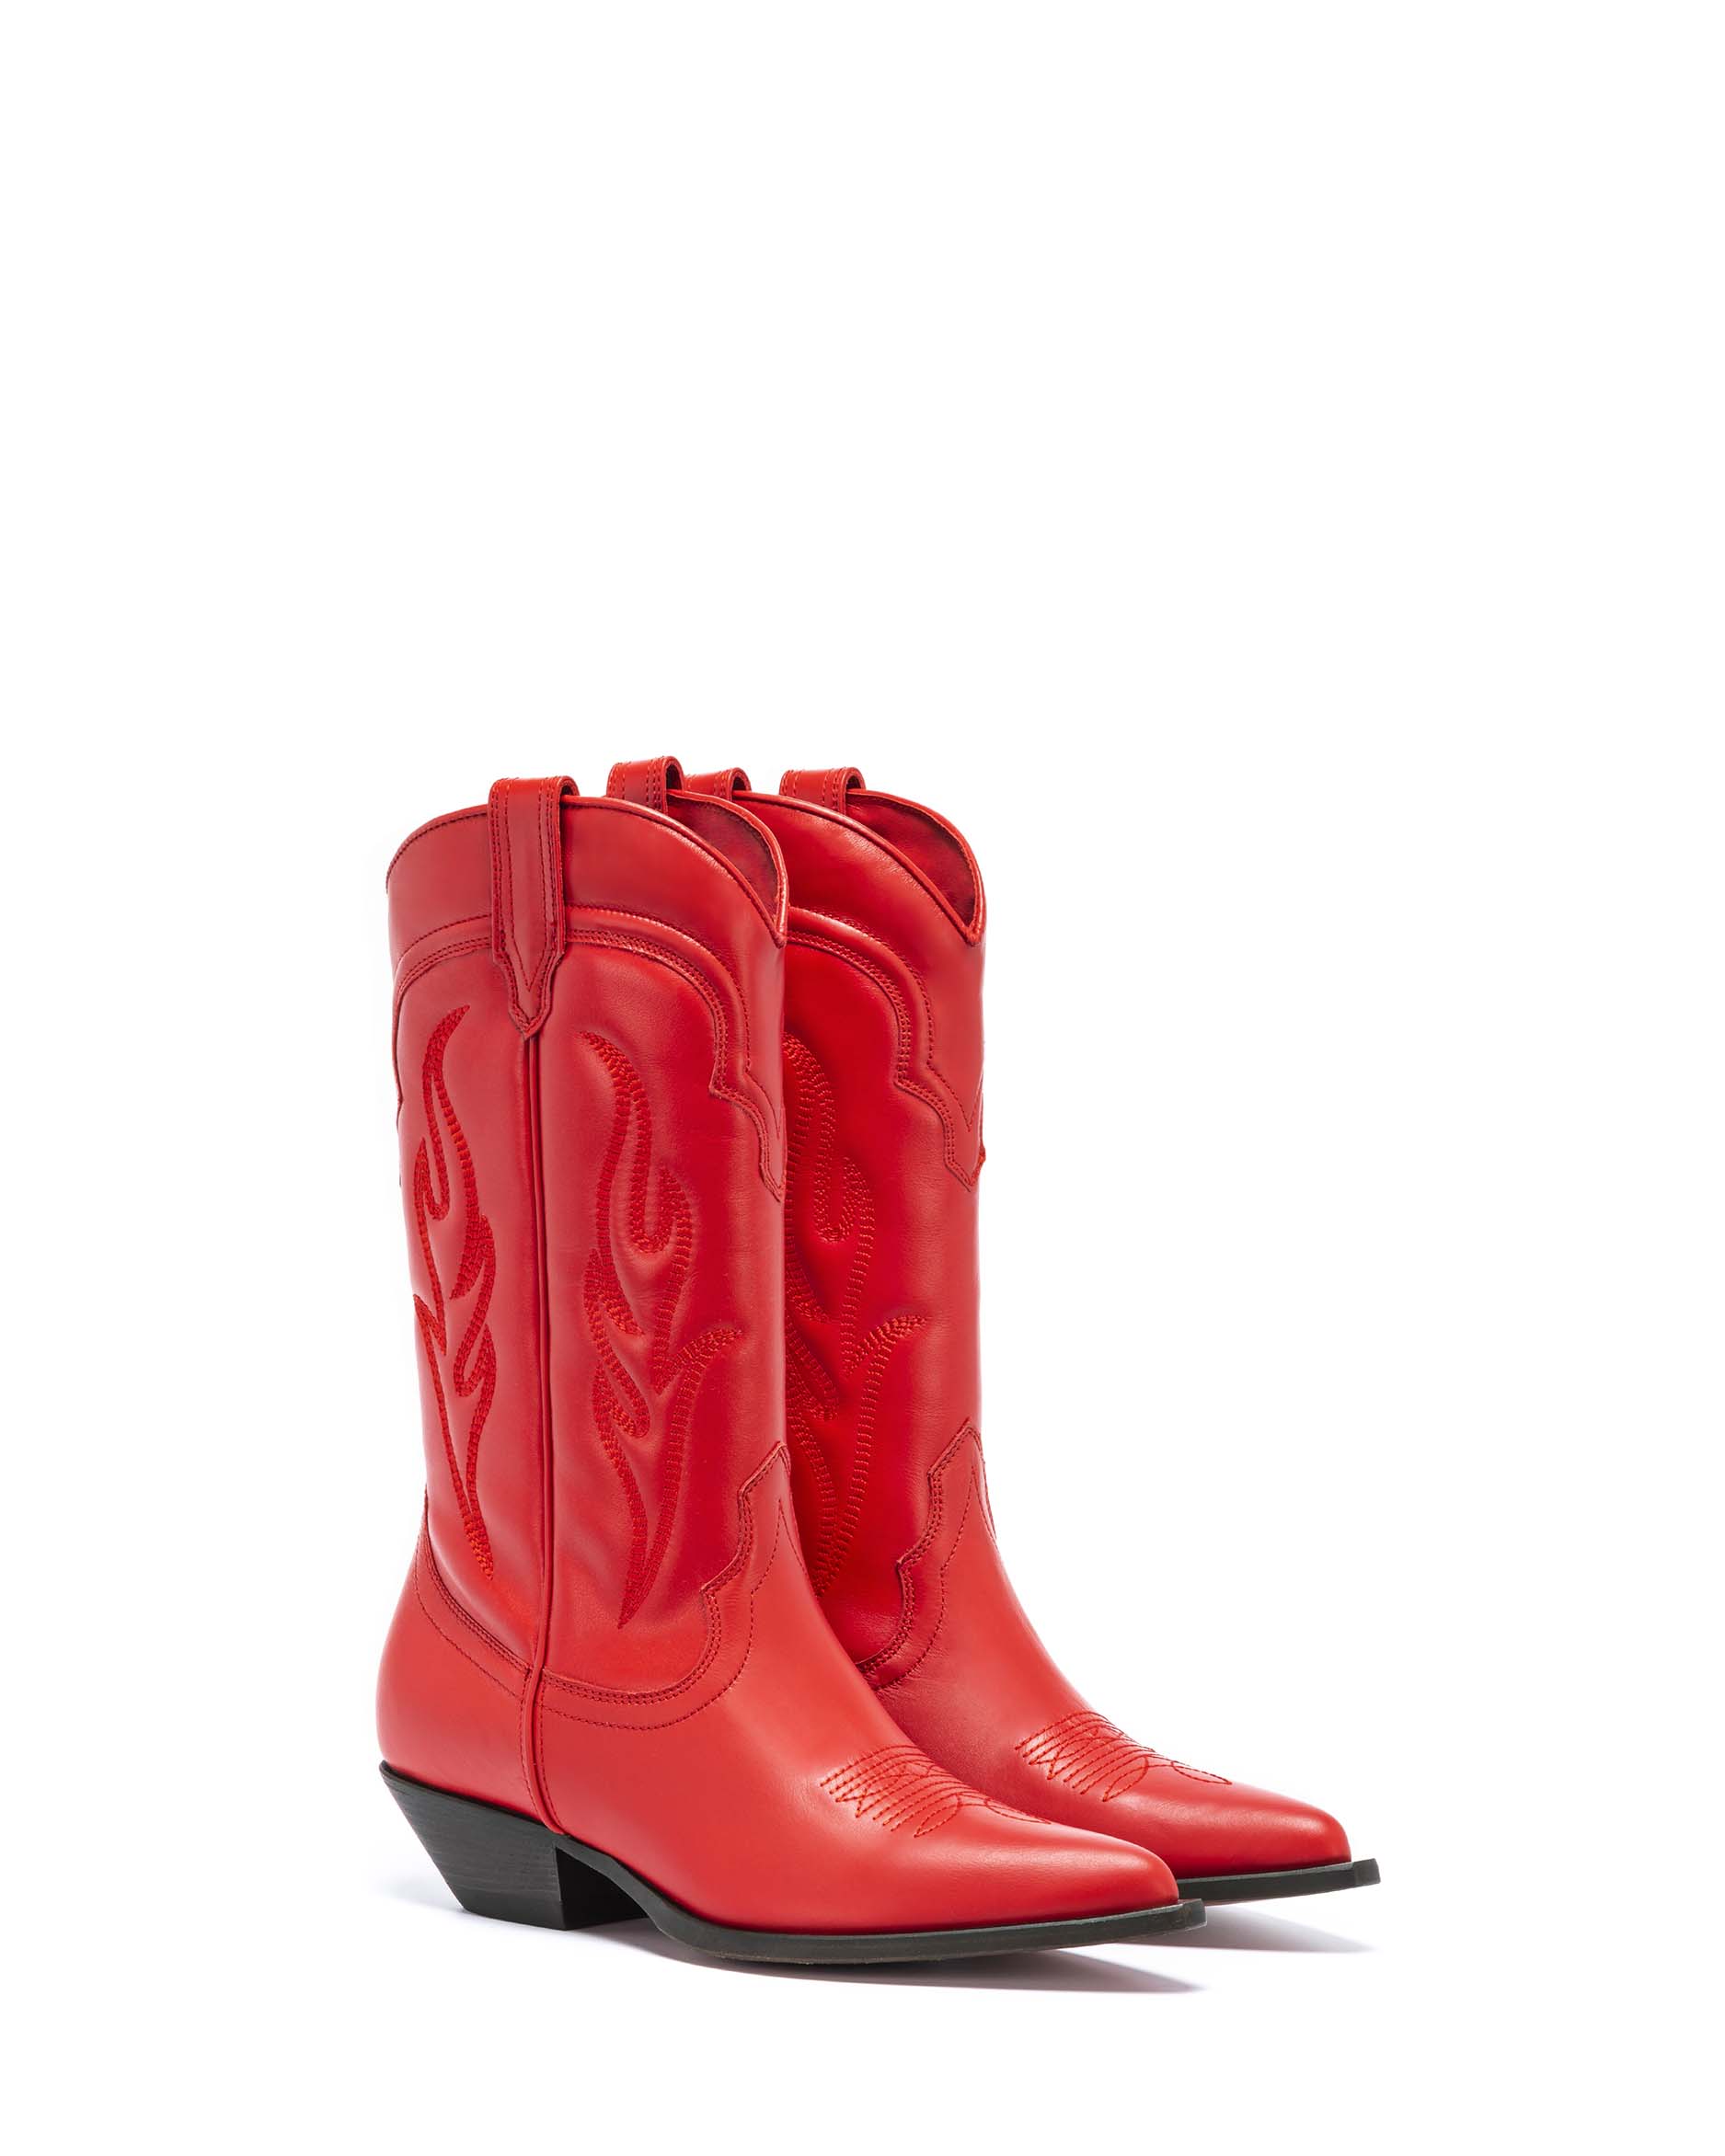 SANTA FE Men's Cowboy Boots in Red Calfskin | On Tone Embroidery_Front_01